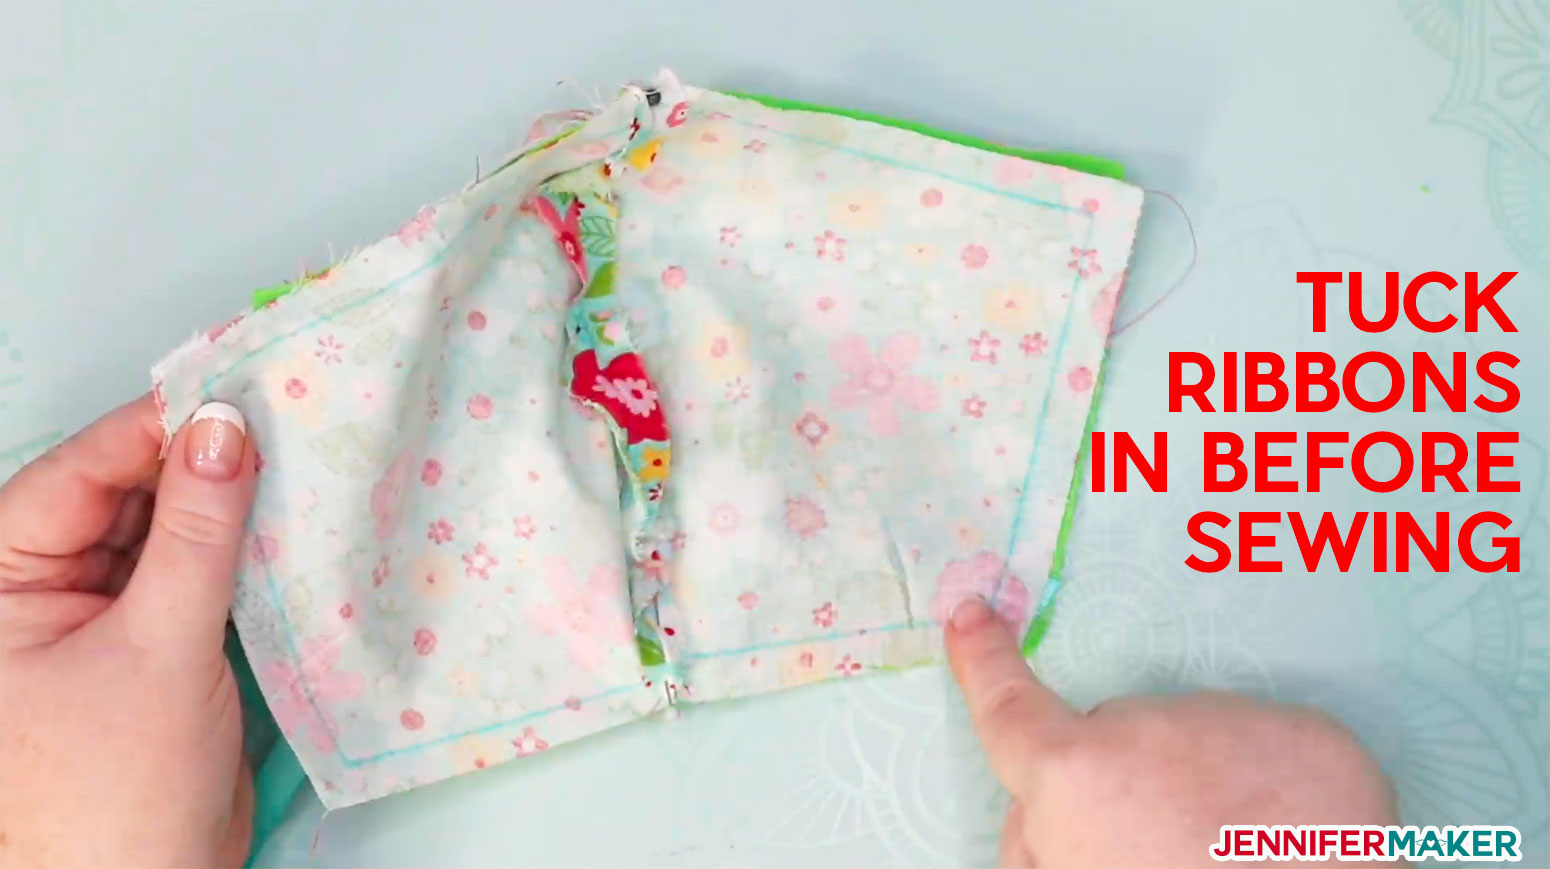 Tuck ribbons in between your layers before sewing your DIY face mask